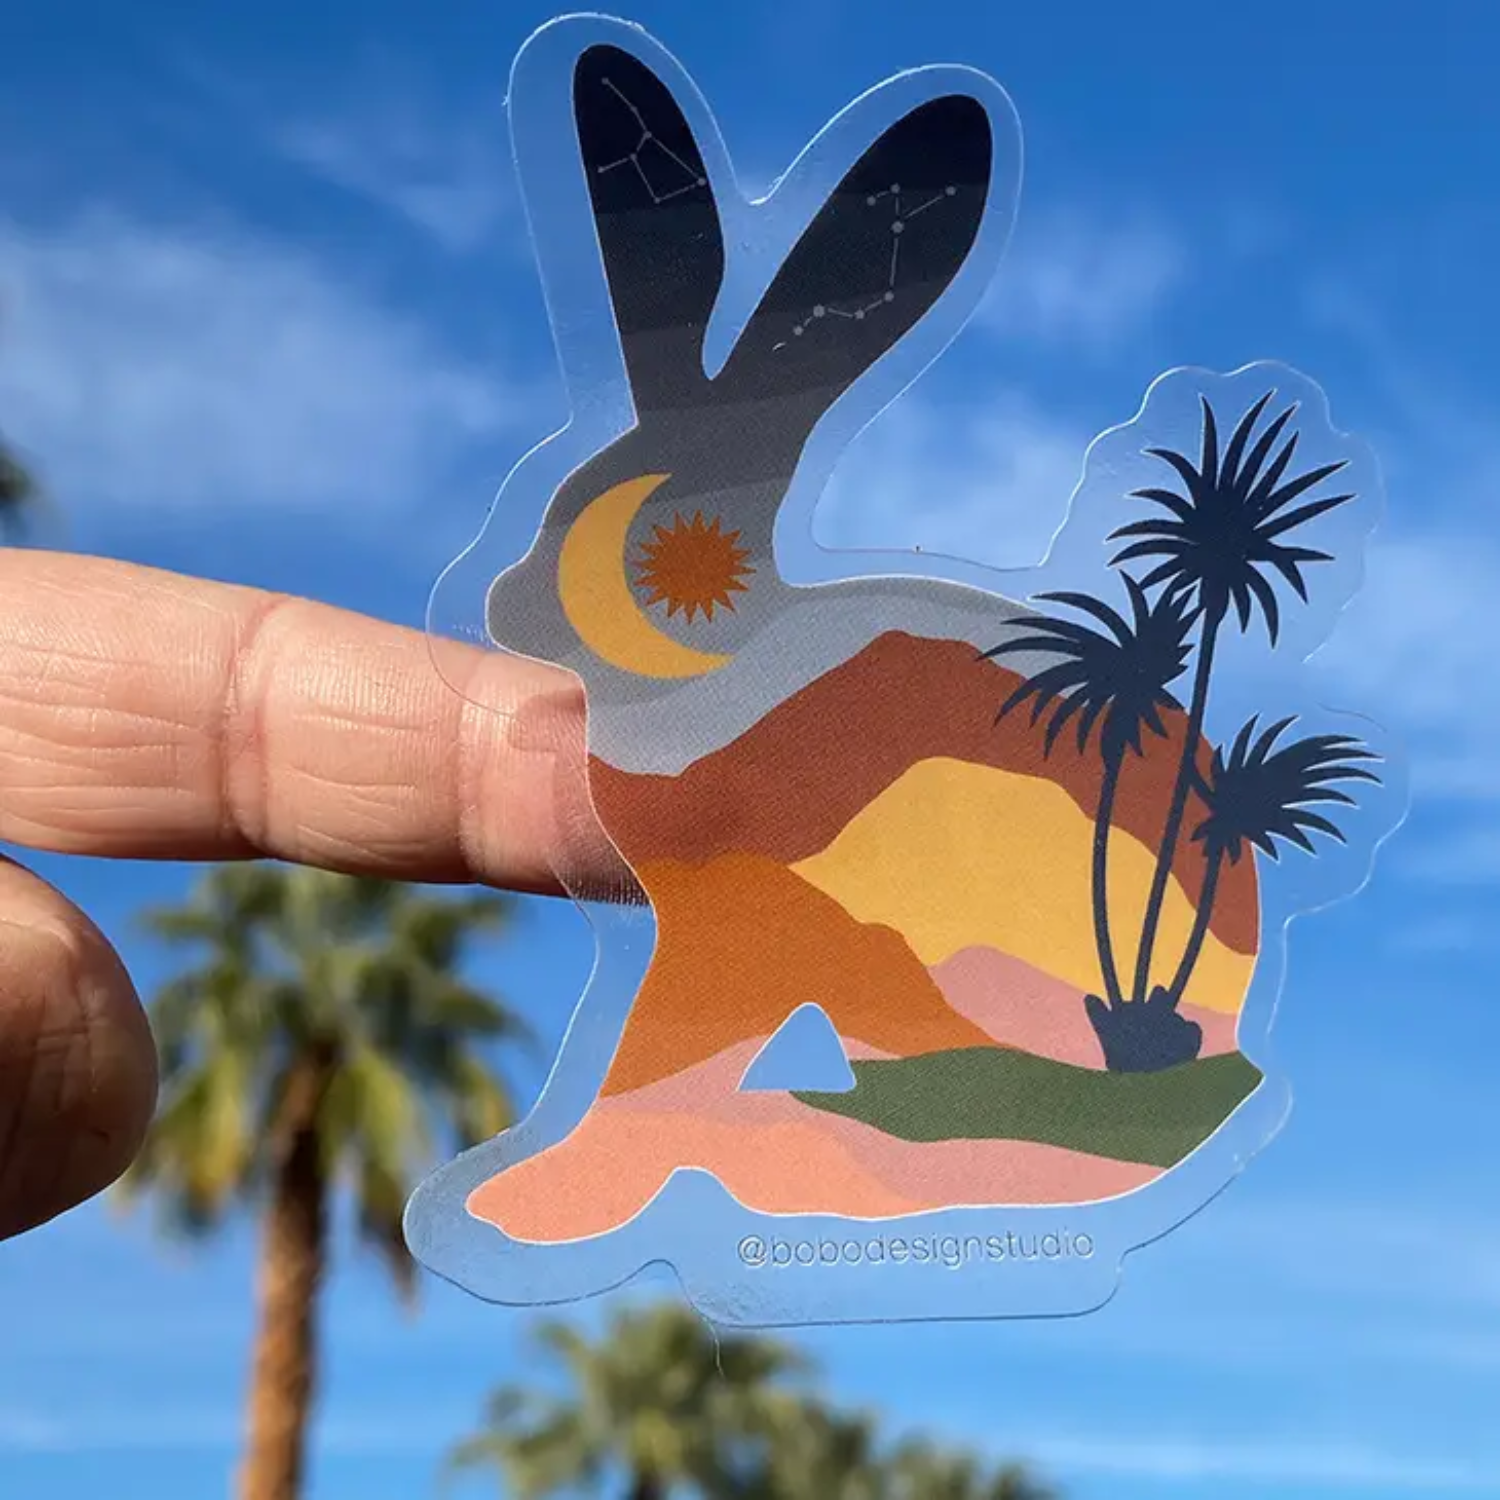 Hand holding bunny sticker up to the sky to show the clear outline